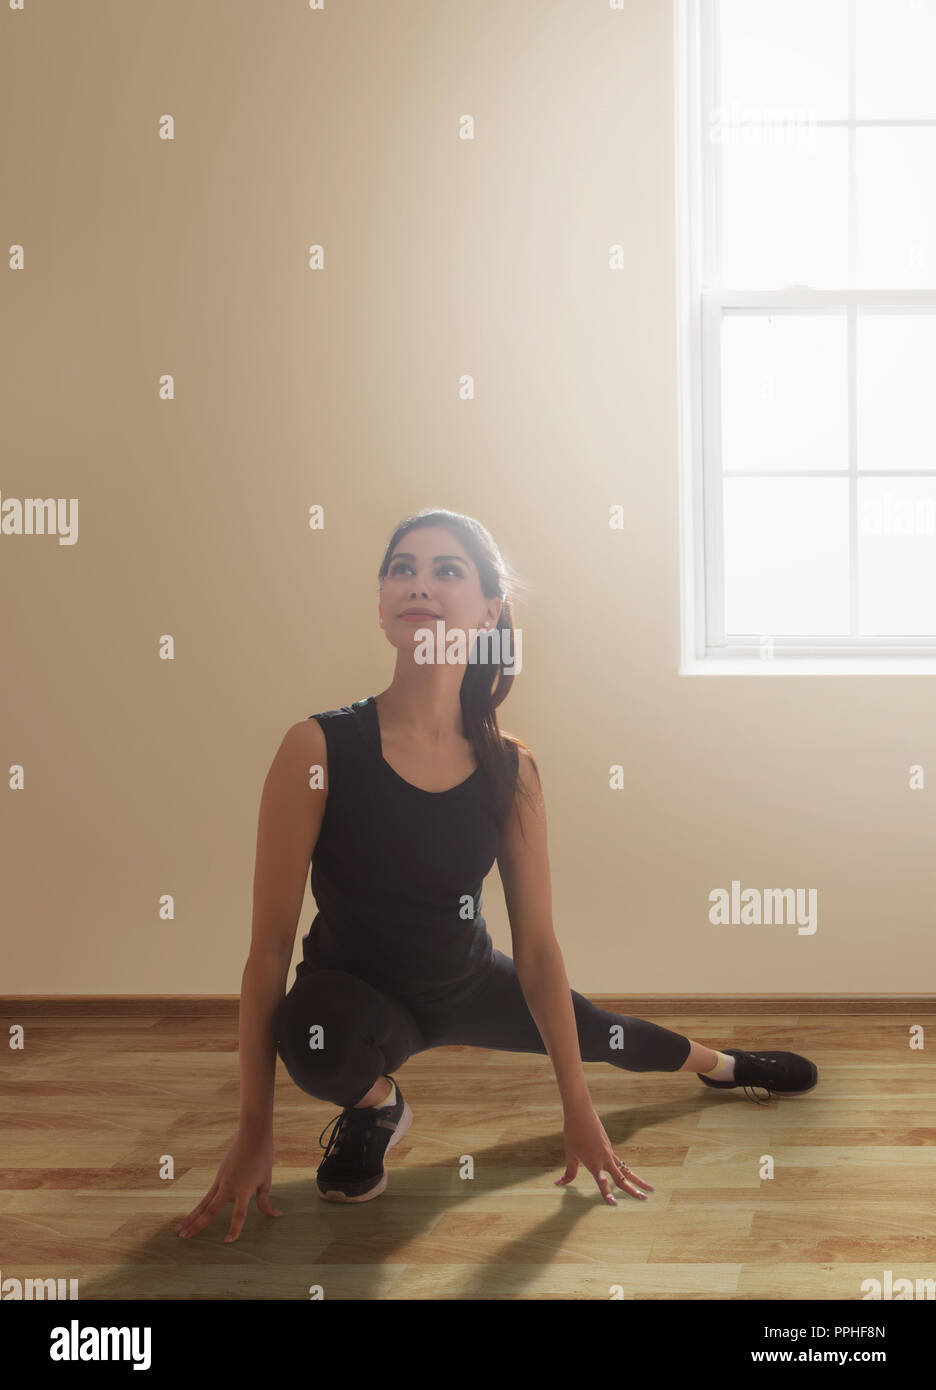 Young woman in workout clothes doing stretching exercises on the floor. Stock Photo